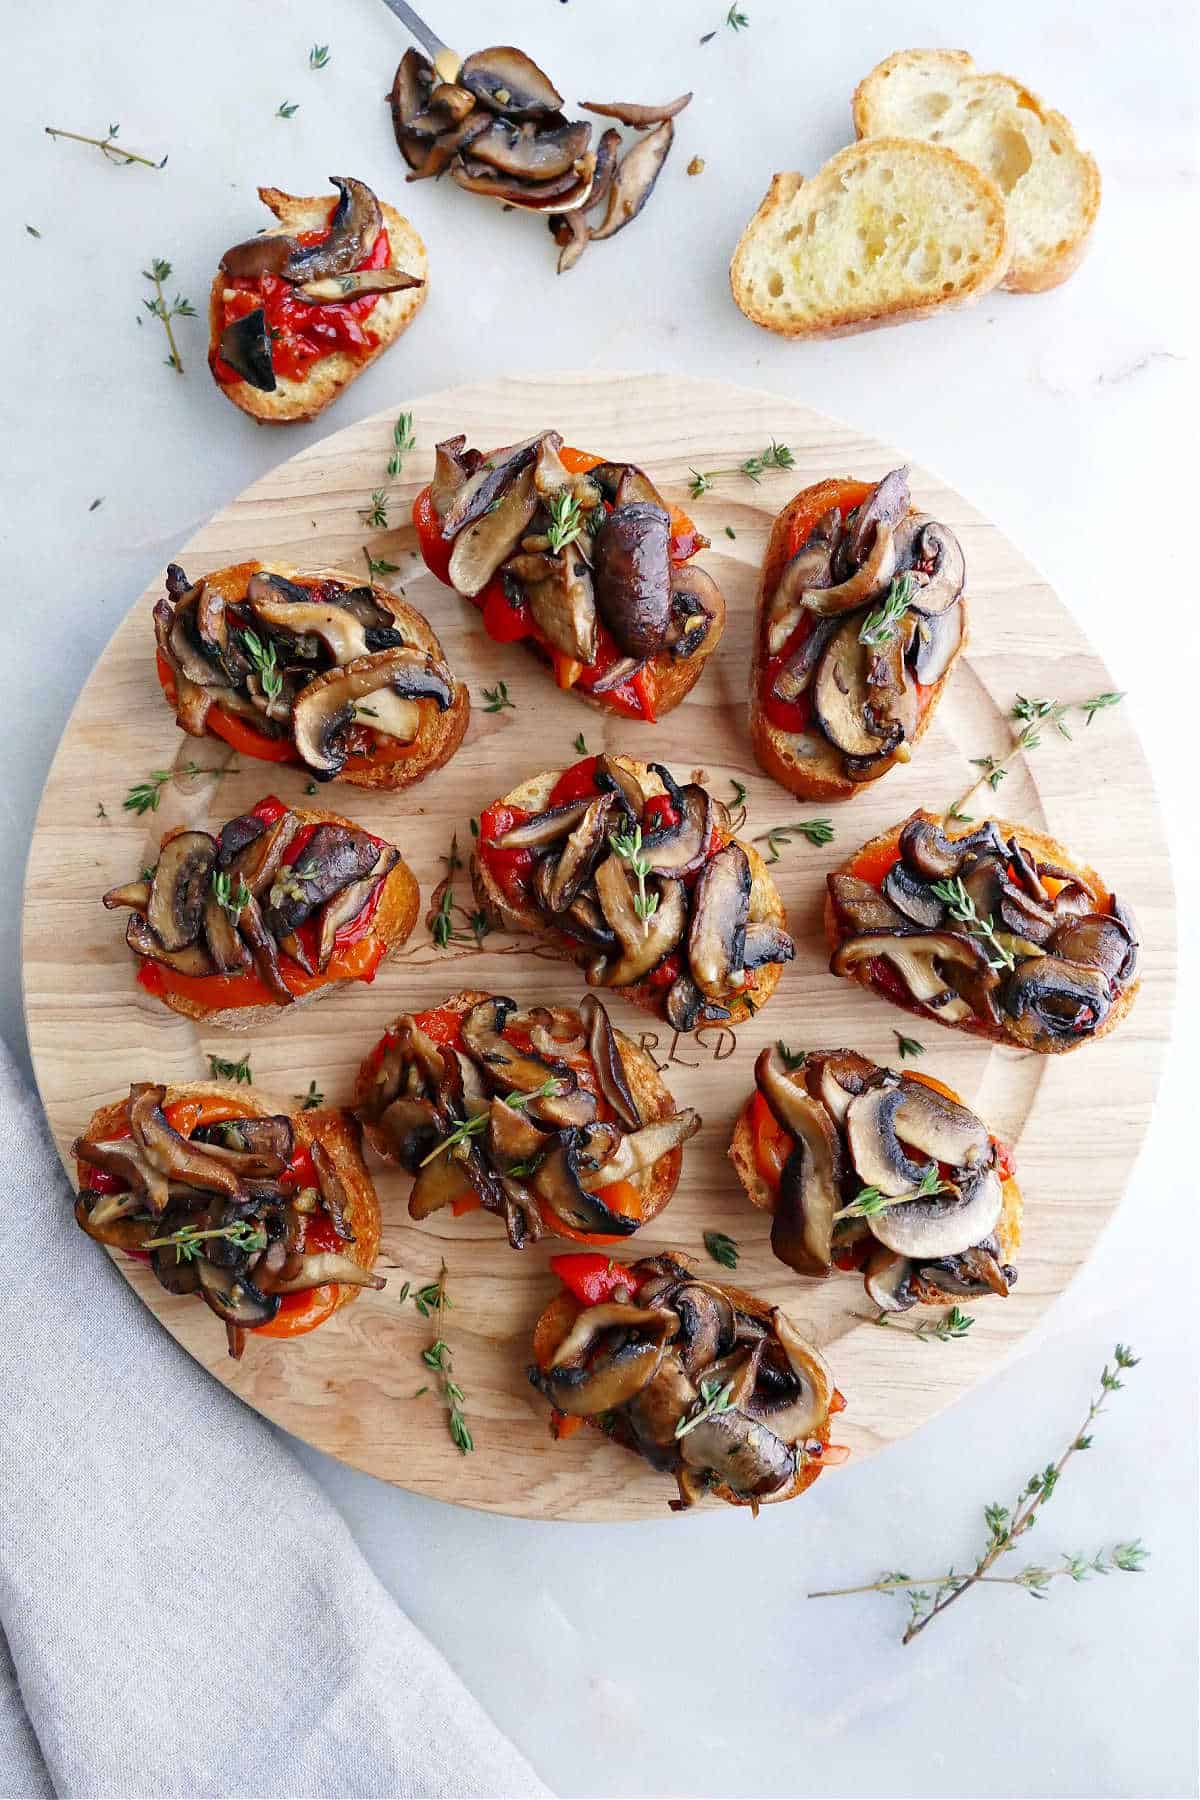 Bruschetta with mushrooms and roasted peppers on a wooden platter.